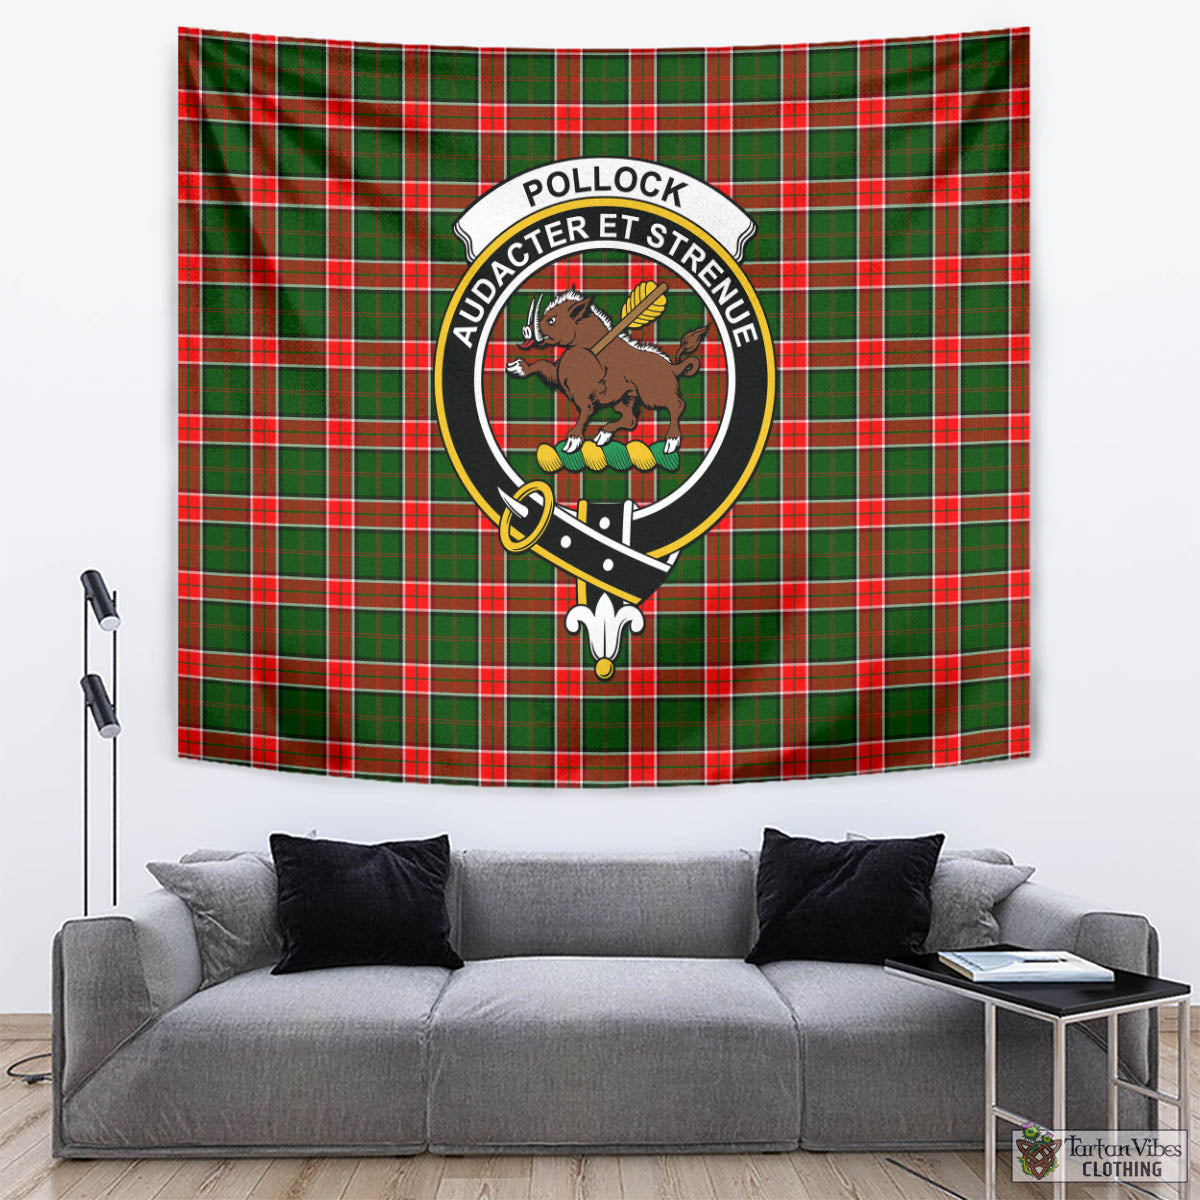 Tartan Vibes Clothing Pollock Modern Tartan Tapestry Wall Hanging and Home Decor for Room with Family Crest